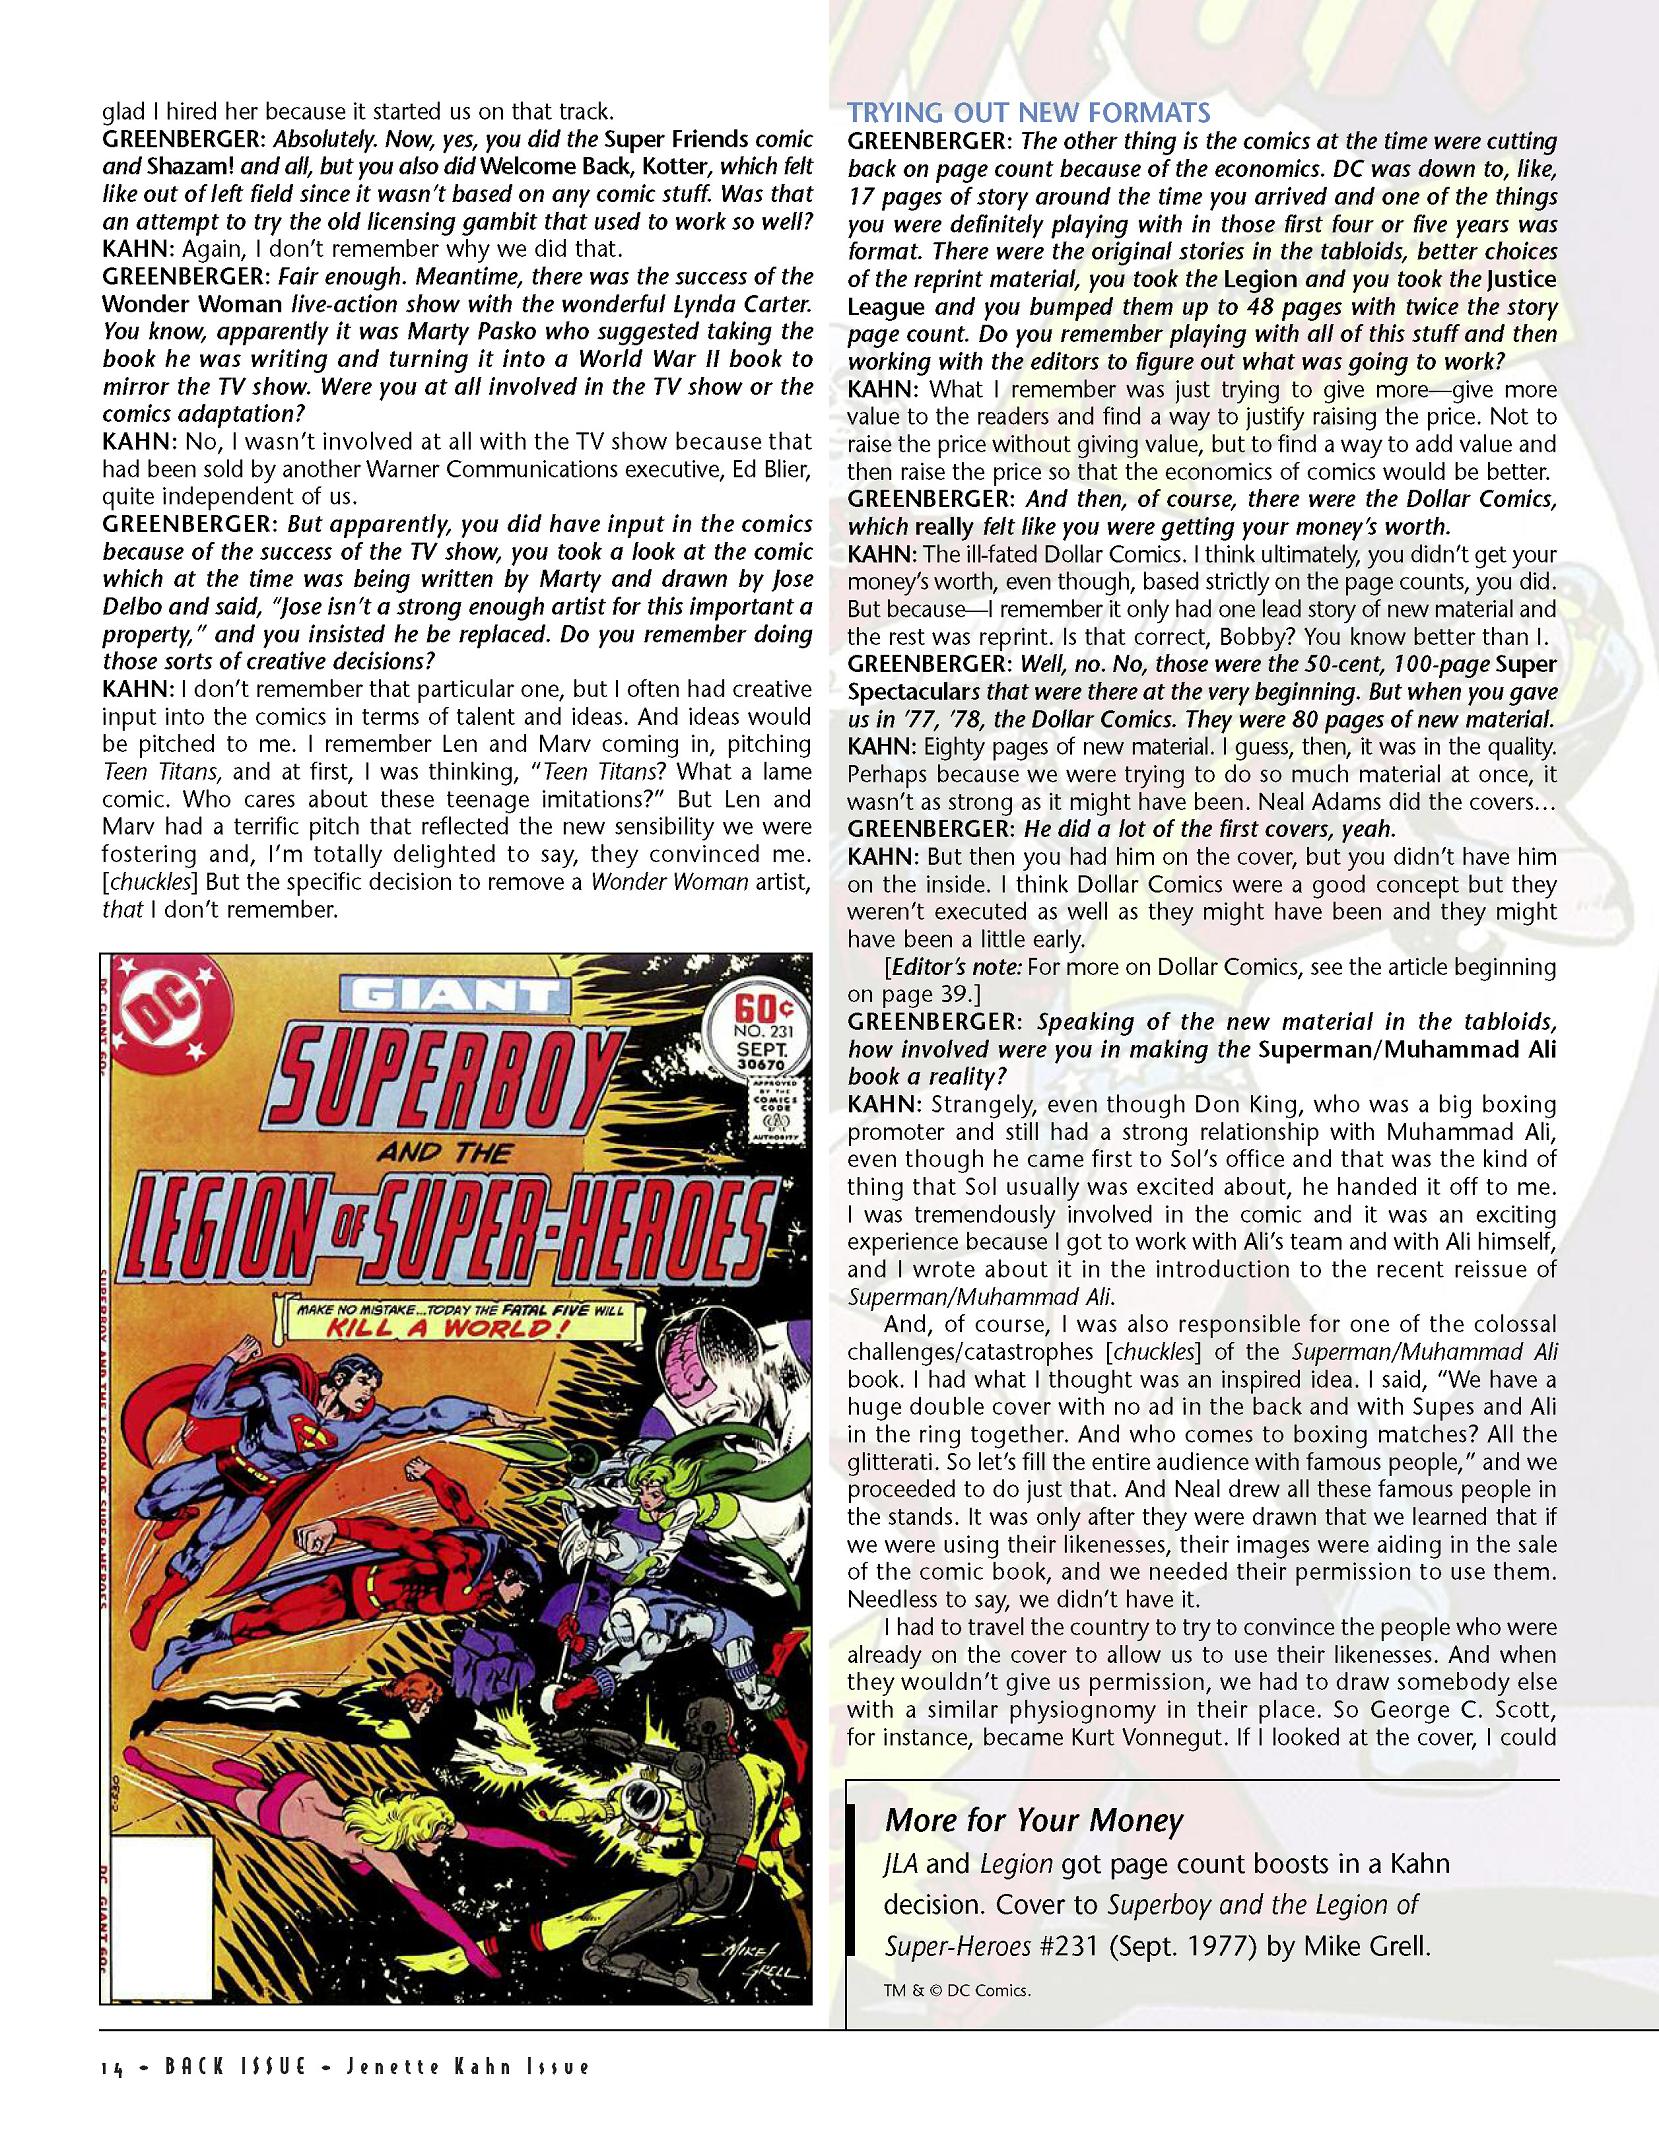 Read online Back Issue comic -  Issue #57 - 15